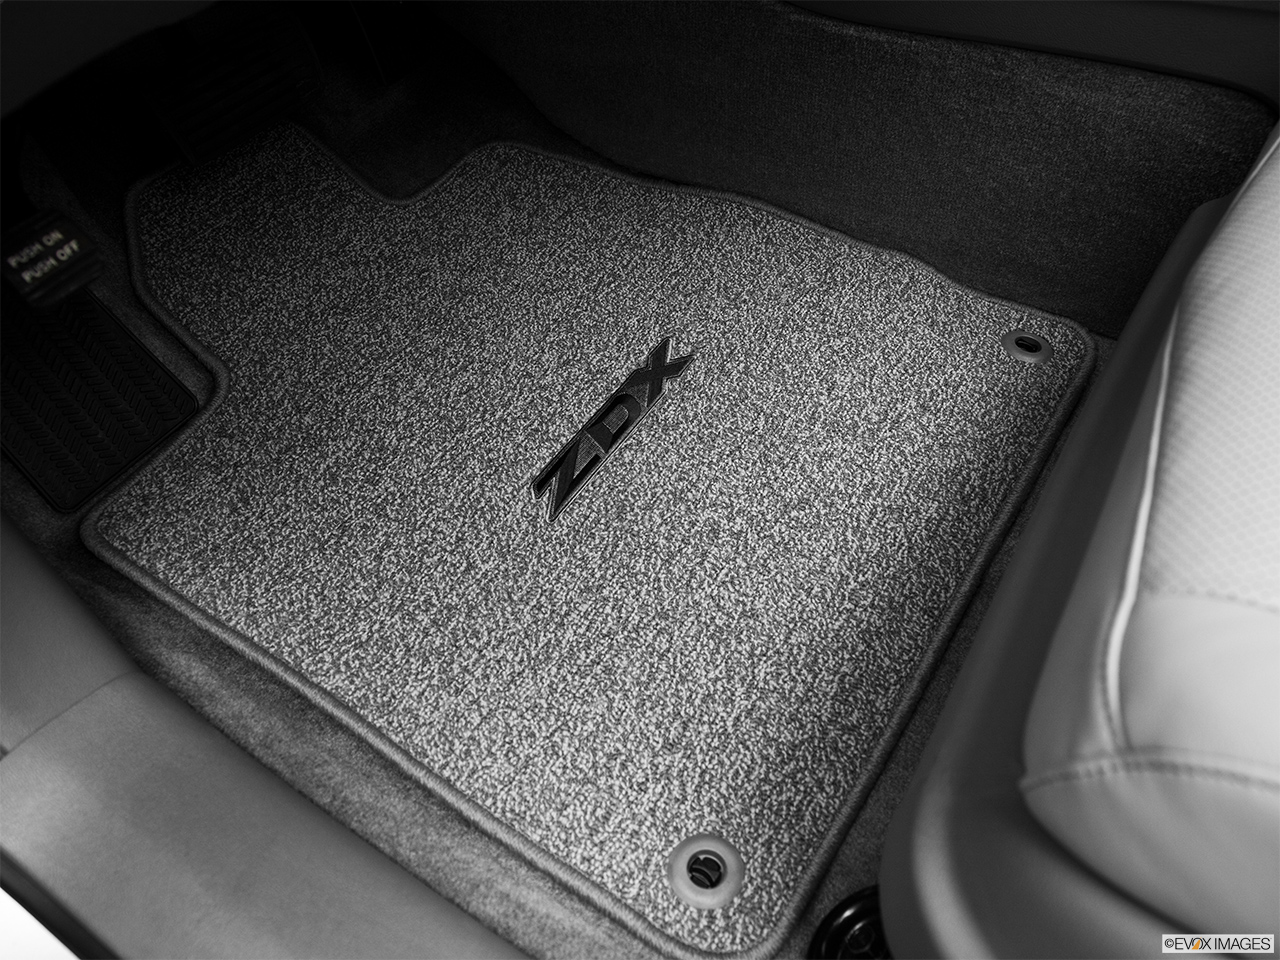 2011 Acura ZDX ZDX Advance Driver's floor mat and pedals. Mid-seat level from outside looking in. 